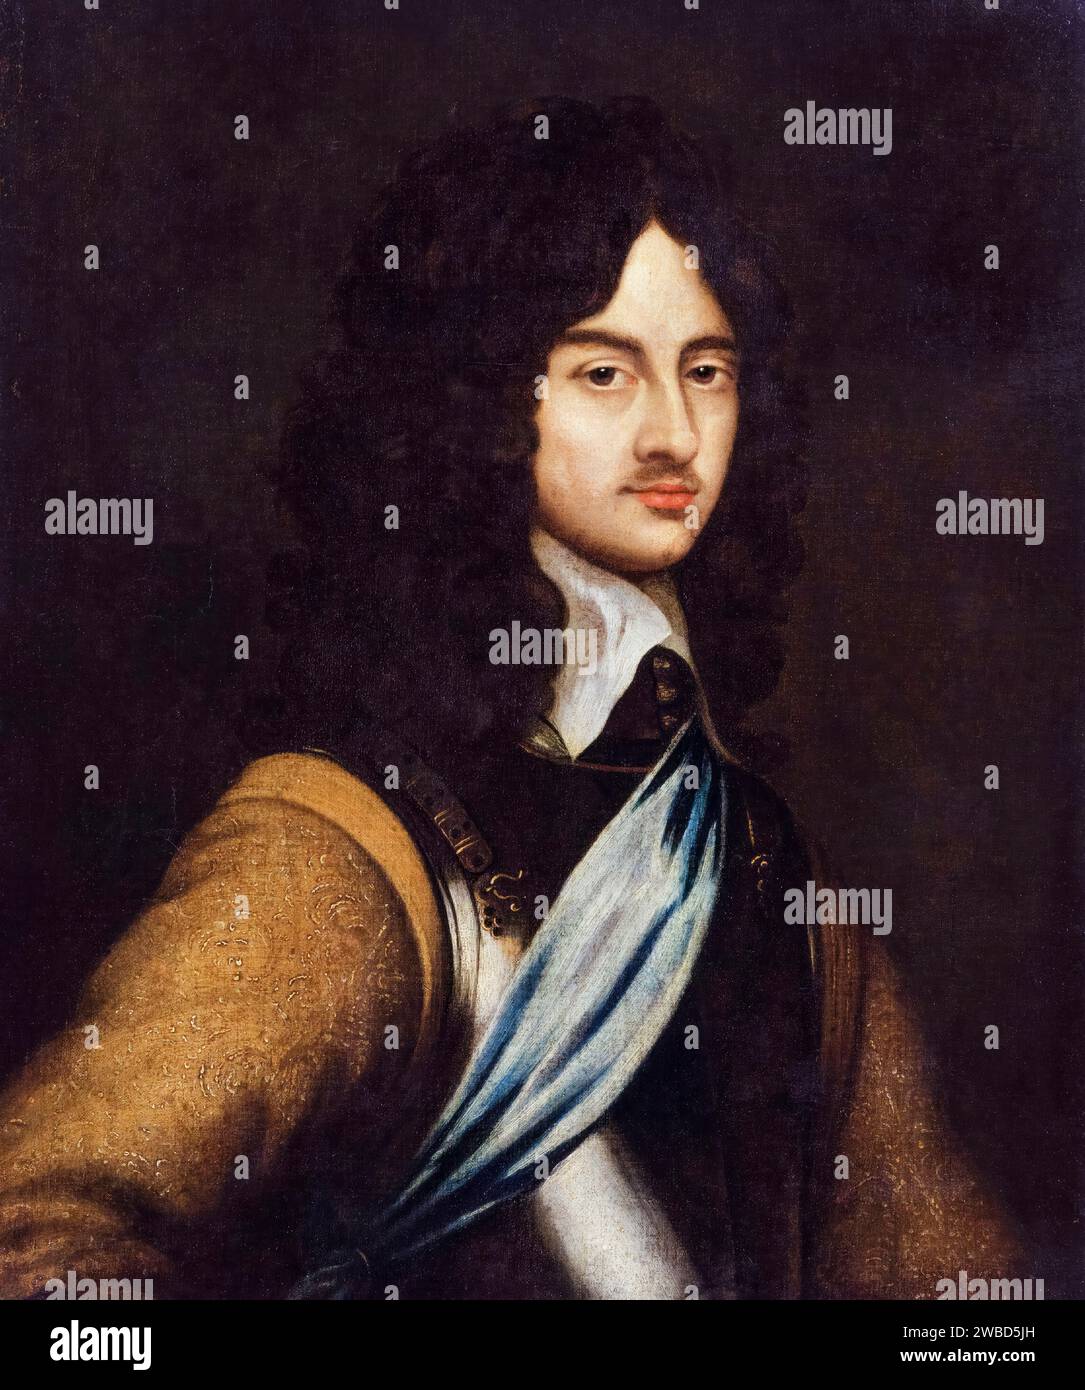 King Charles II of England (1630-1685), portrait painting in oil on canvas after Adriaen Hanneman, before 1699 Stock Photo